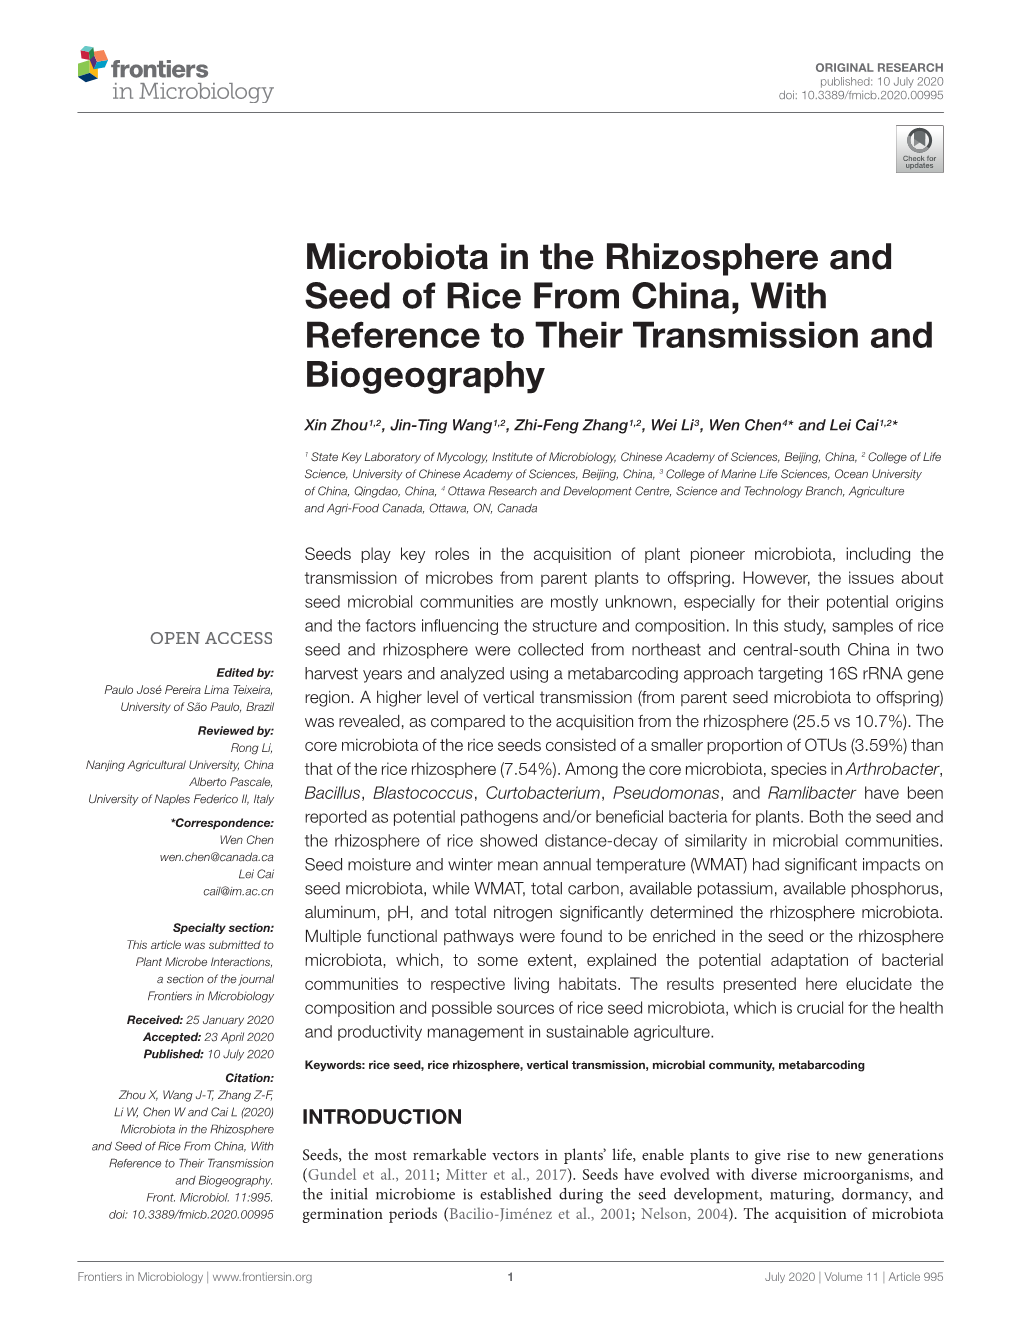 Microbiota in the Rhizosphere and Seed of Rice from China, with Reference to Their Transmission and Biogeography